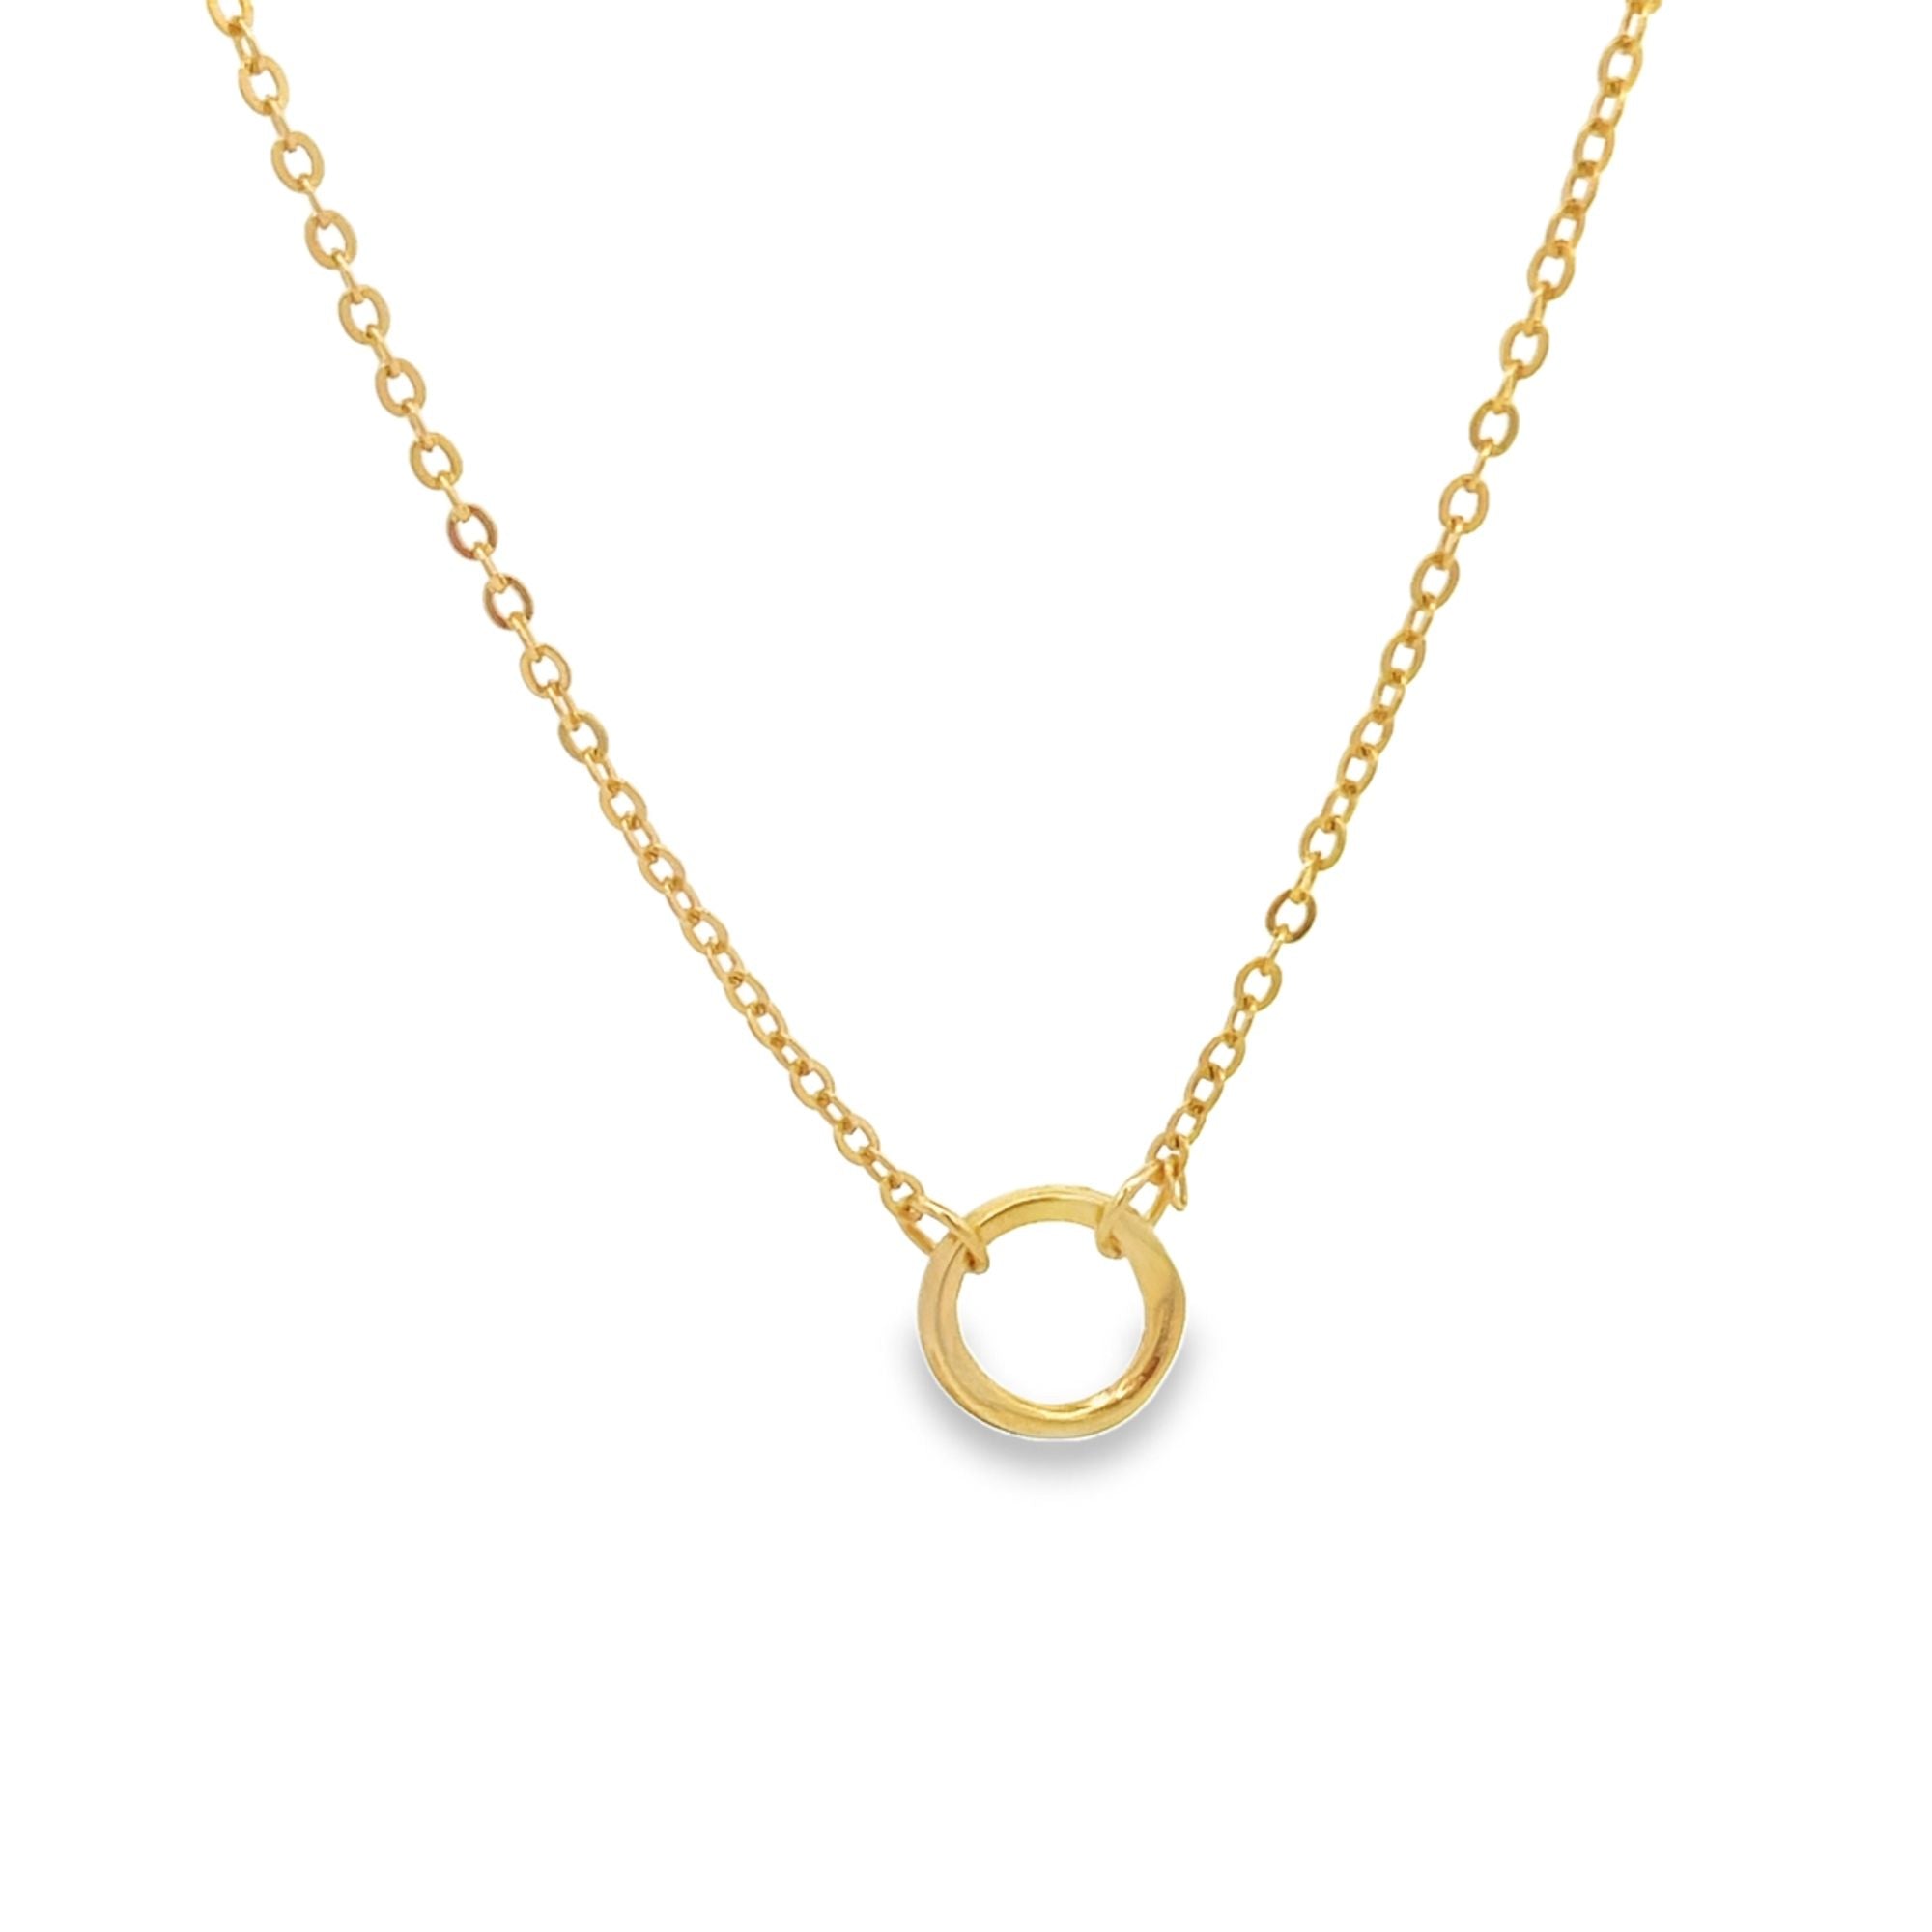 Gold Karma Circle Necklace For 18K Gold Filled (F137, F137A, F137B)